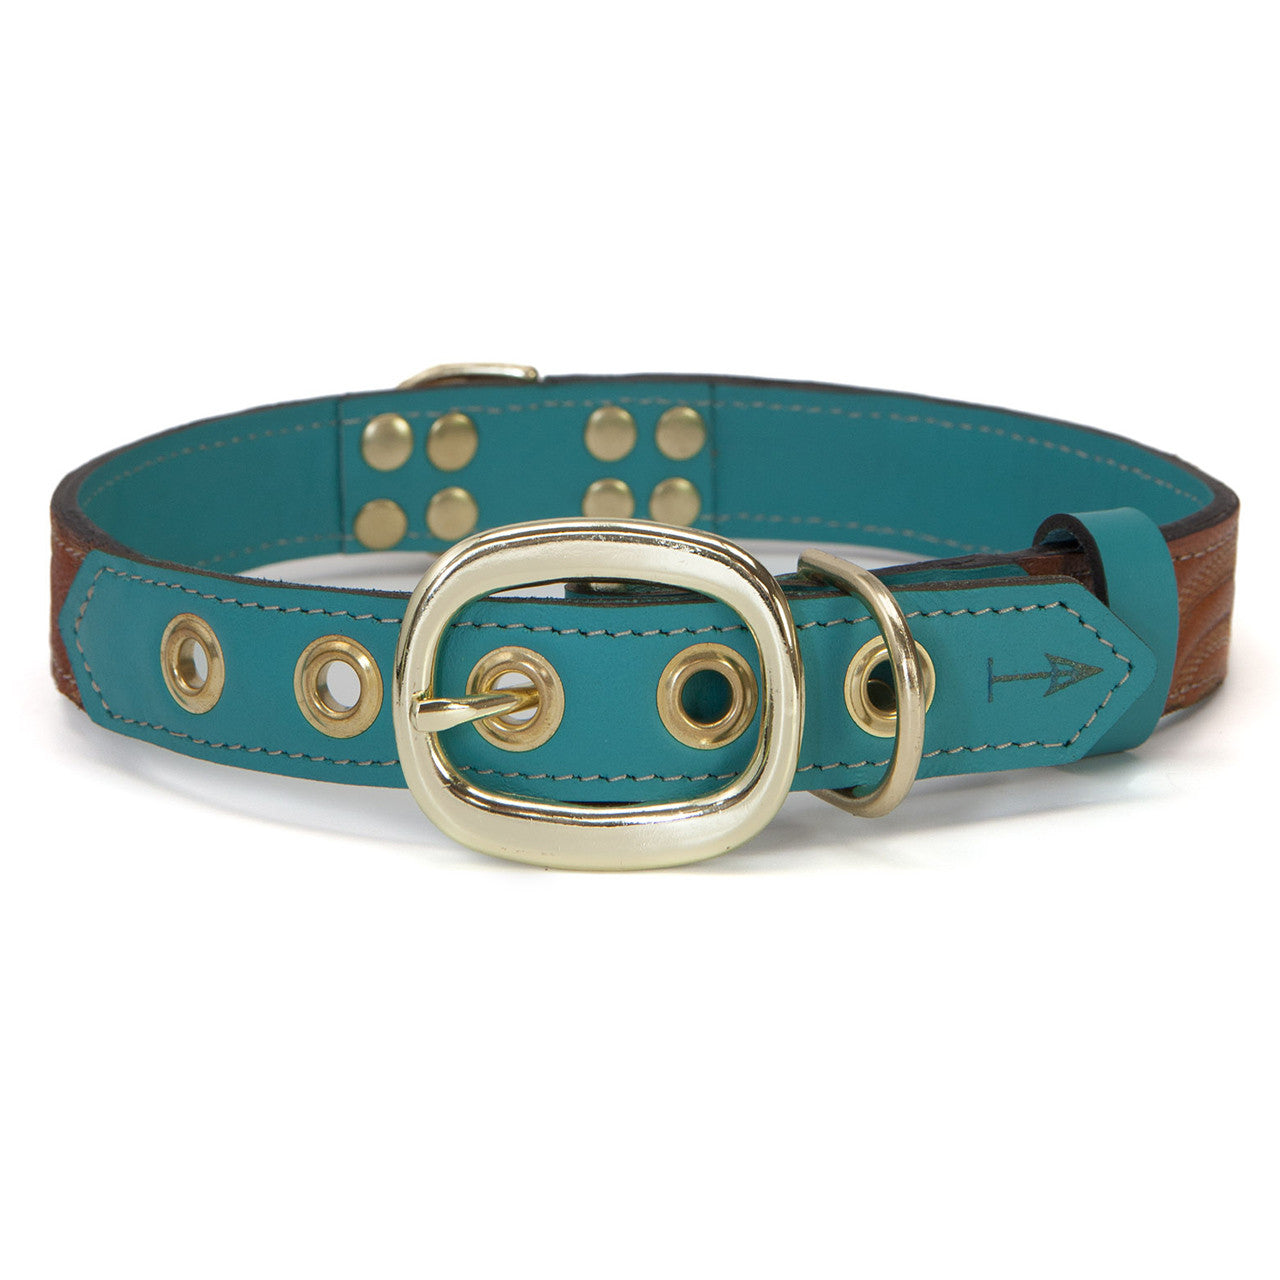 Turquoise Dog Collar with Brown Leather + Tan Stitching (back view)